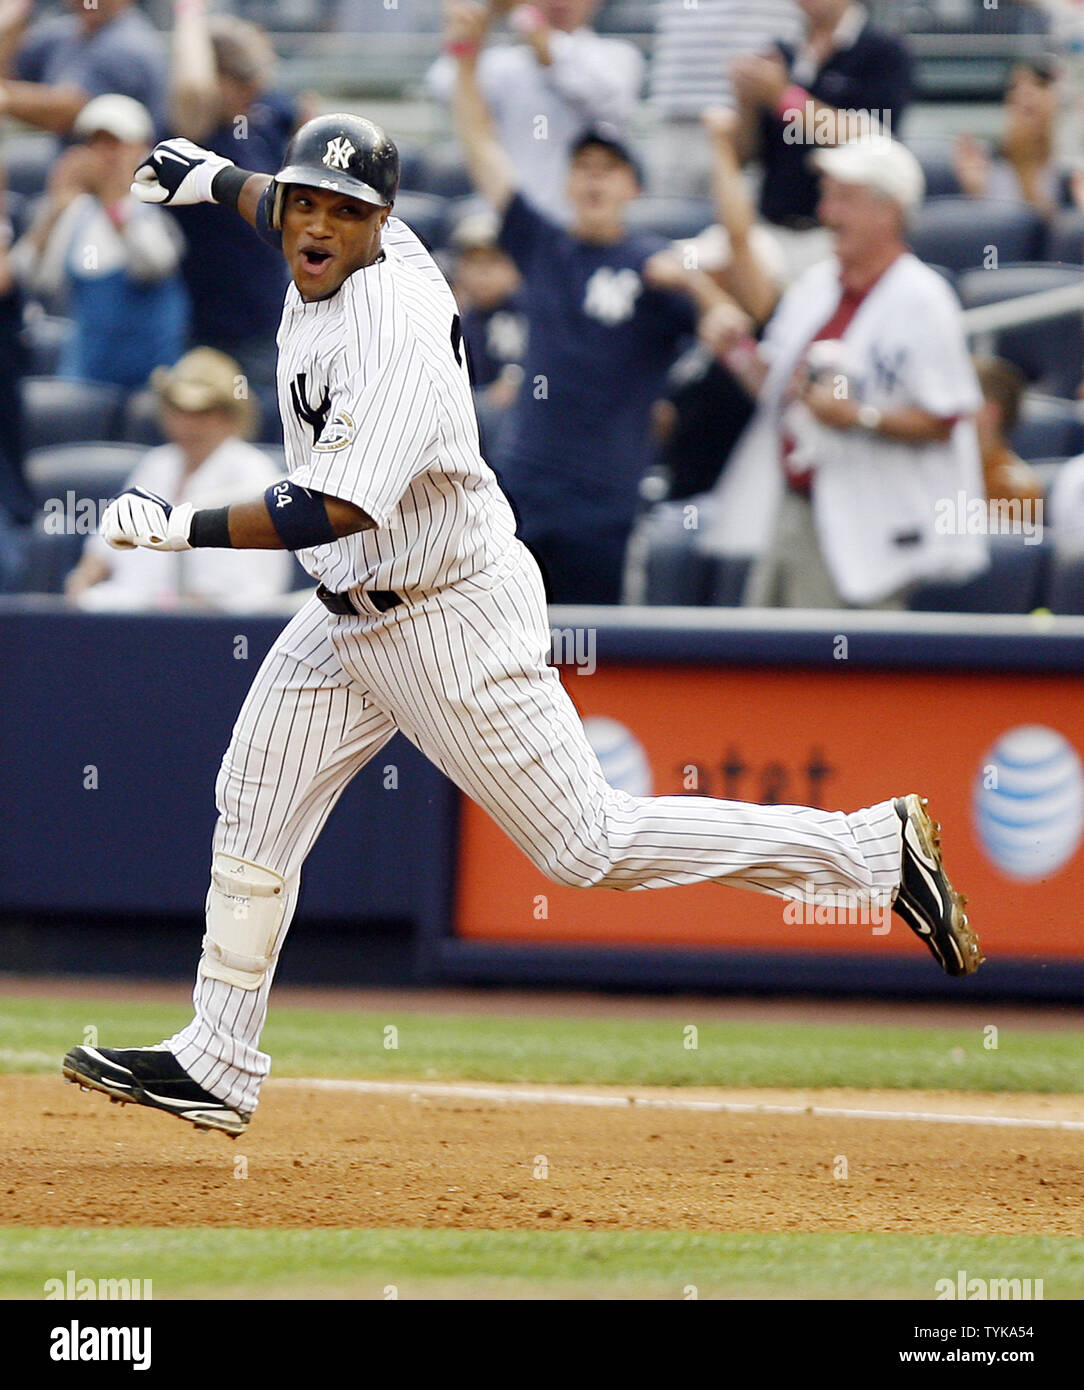 New York Yankees Robinson Cano reacts after hitting a game winning walk off  RBI single in the eleventh inning at Yankee Stadium in New York City on  August 12, 2009. The Yankees